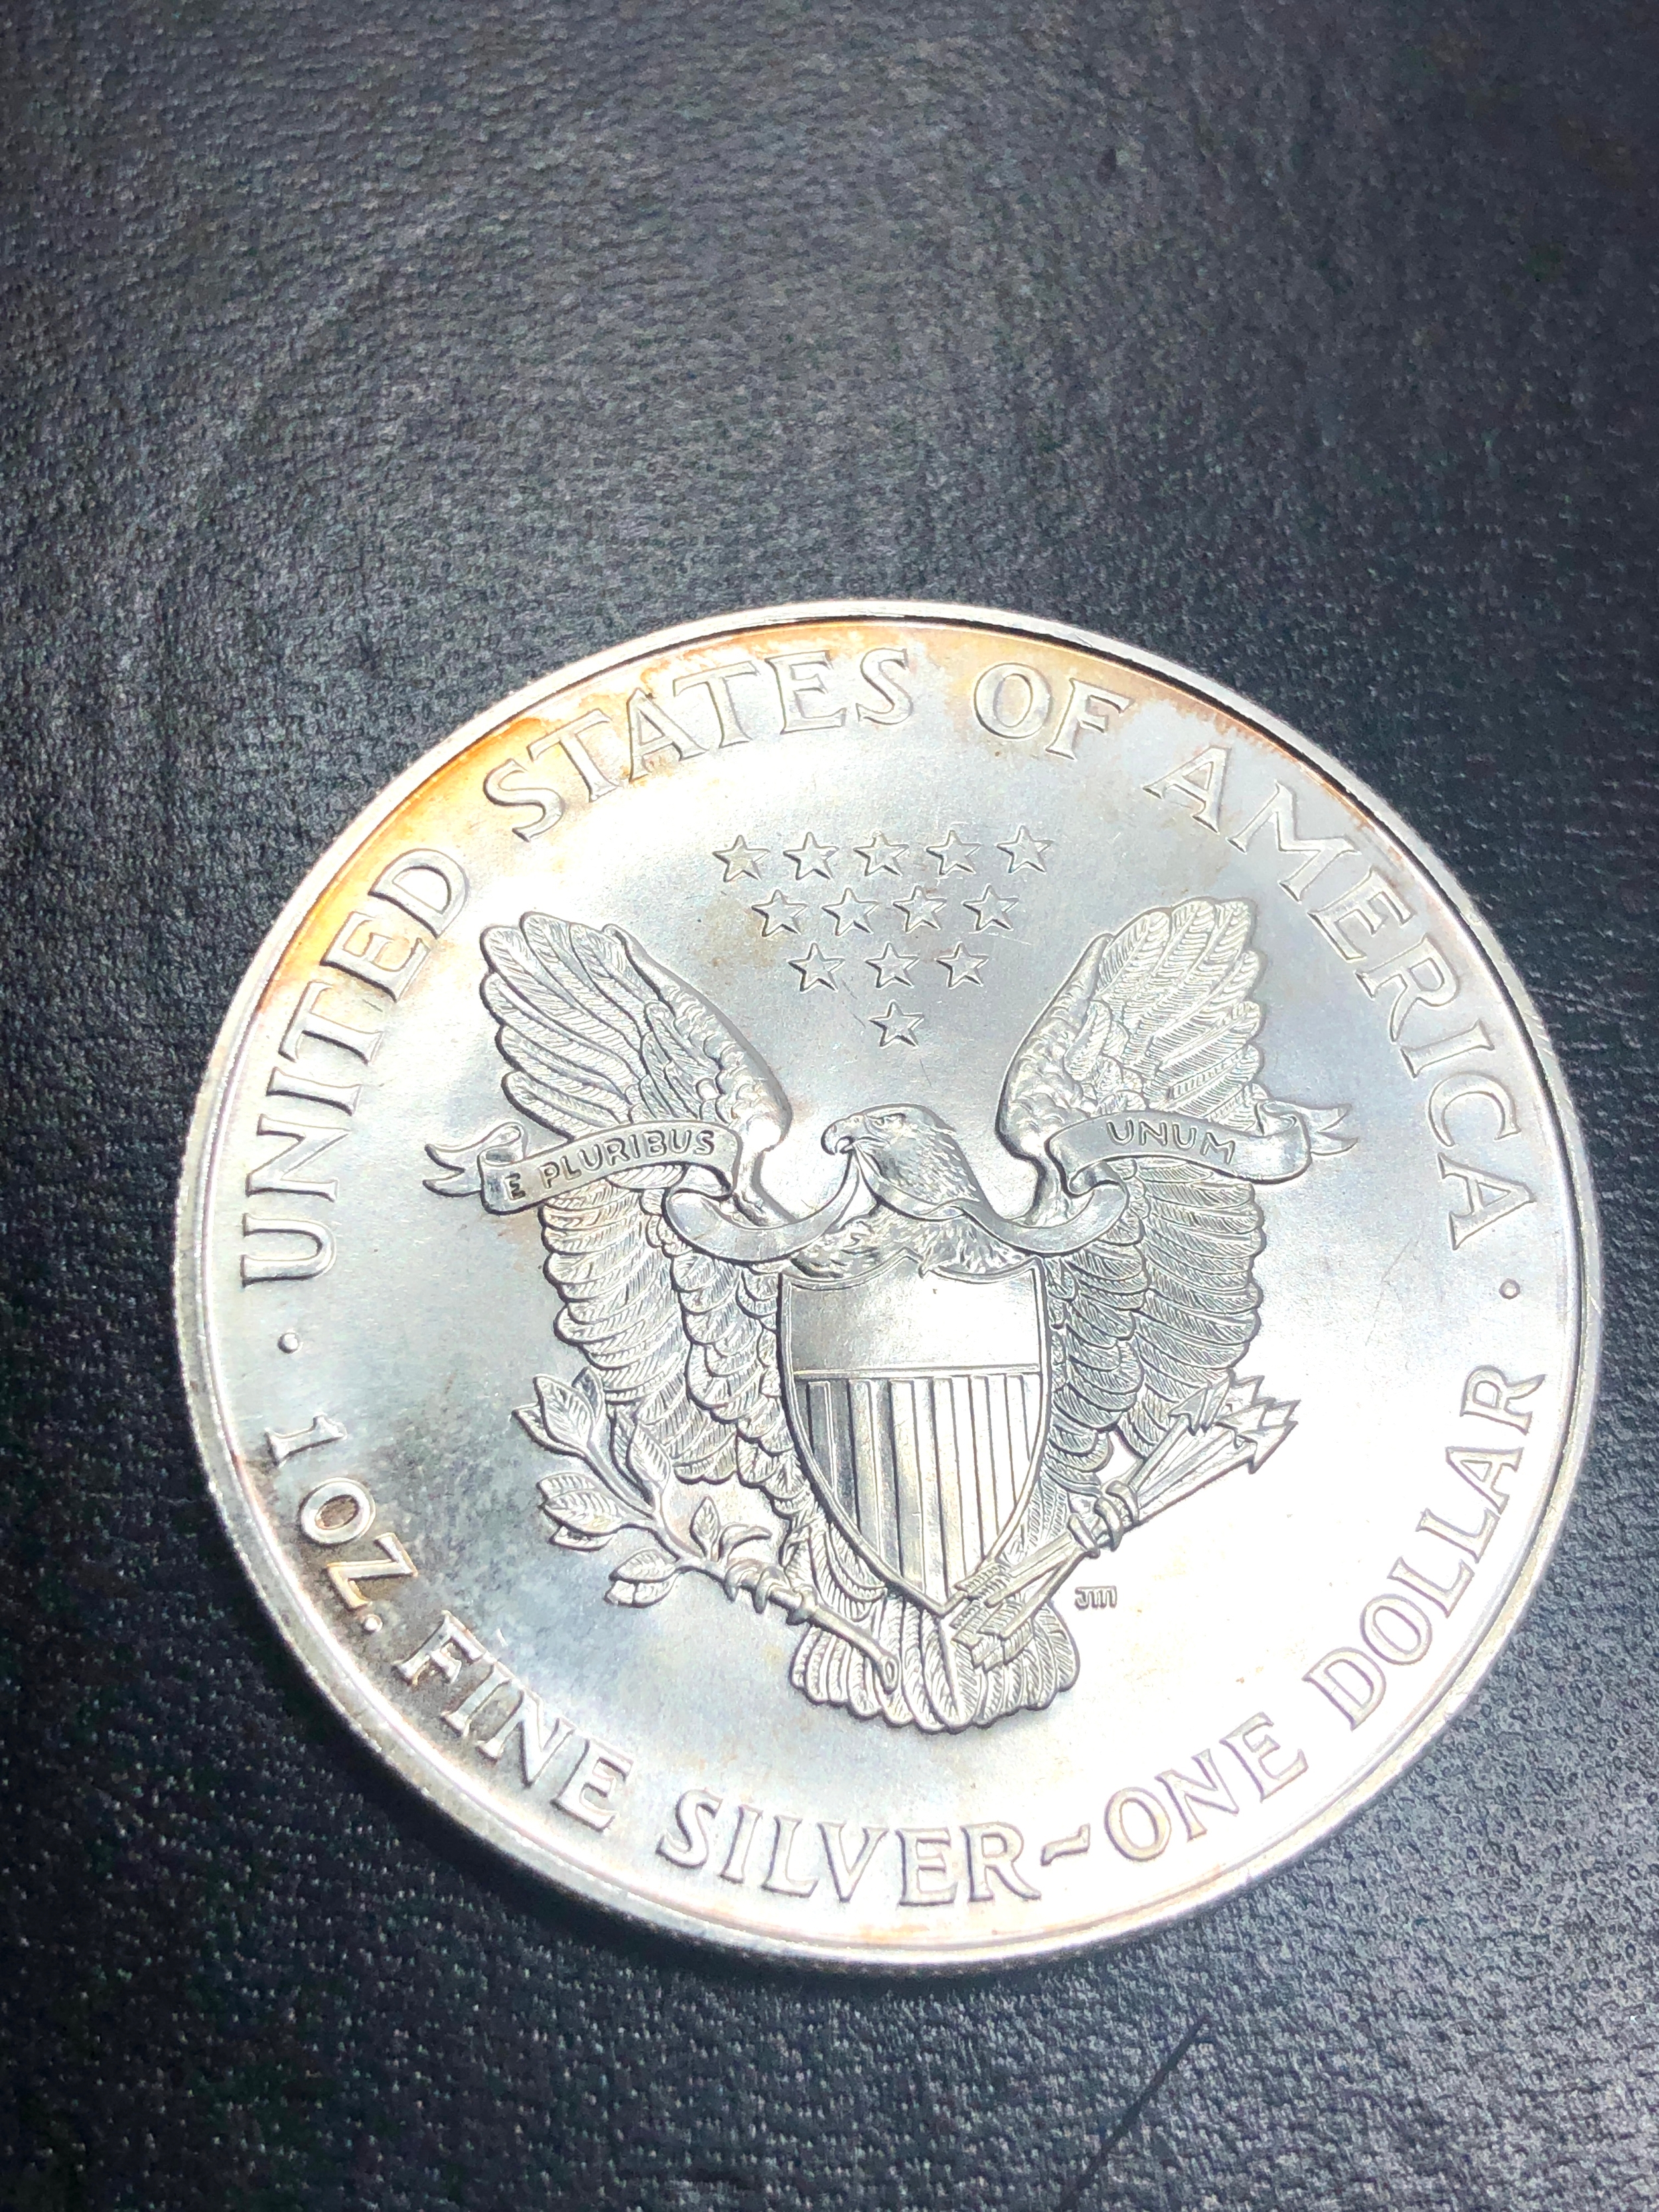 1994 1 oz fine silver liberty one dollar - Image 2 of 2